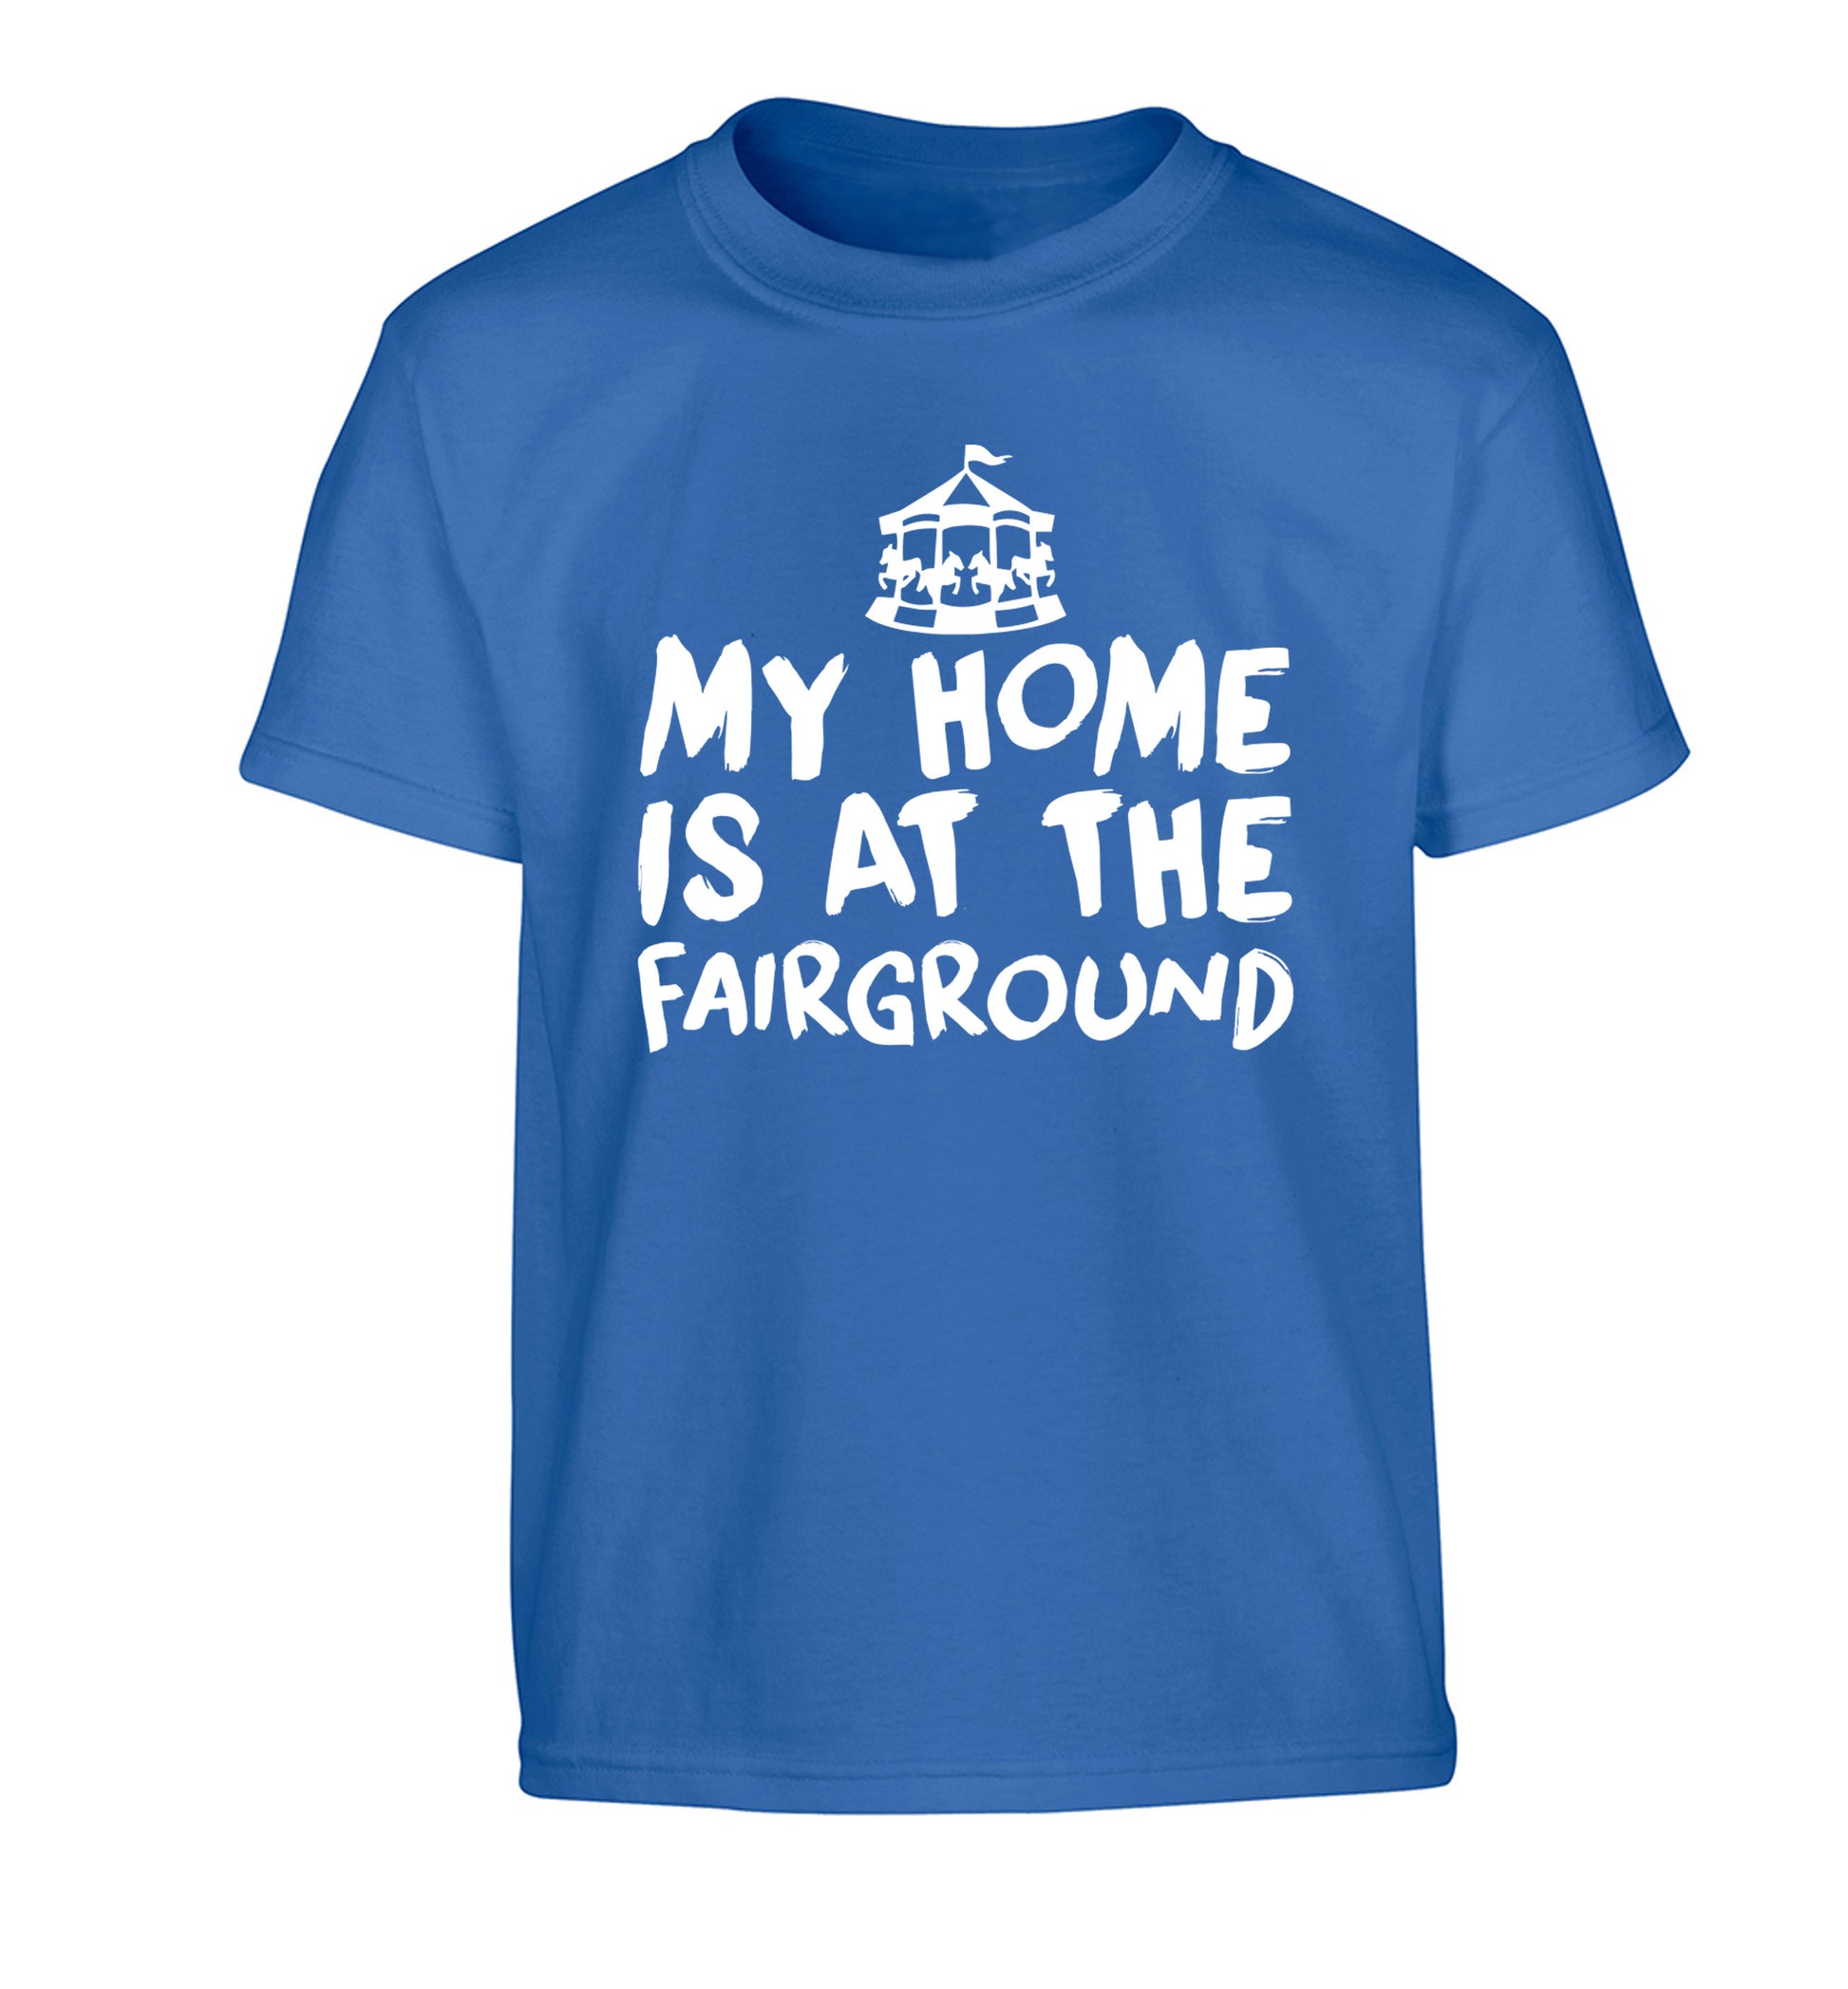 My home is at the fairground Children's blue Tshirt 12-14 Years